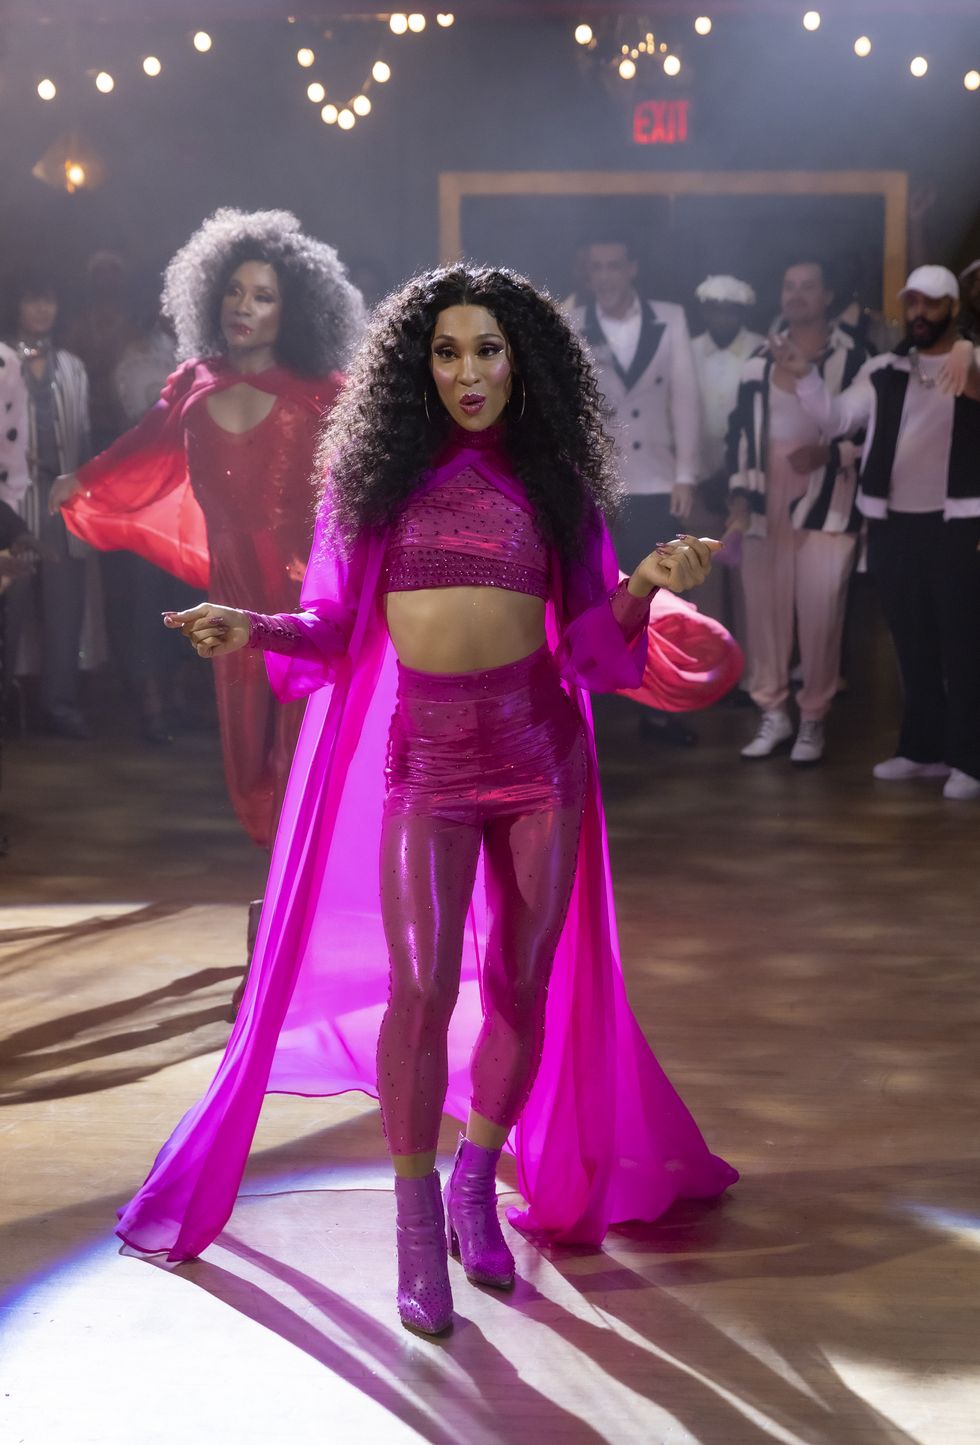 pose    "series finale"    season 3, episode 7 airs june 6 pictured mj rodriguez as blanca cr eric liebowitzfx